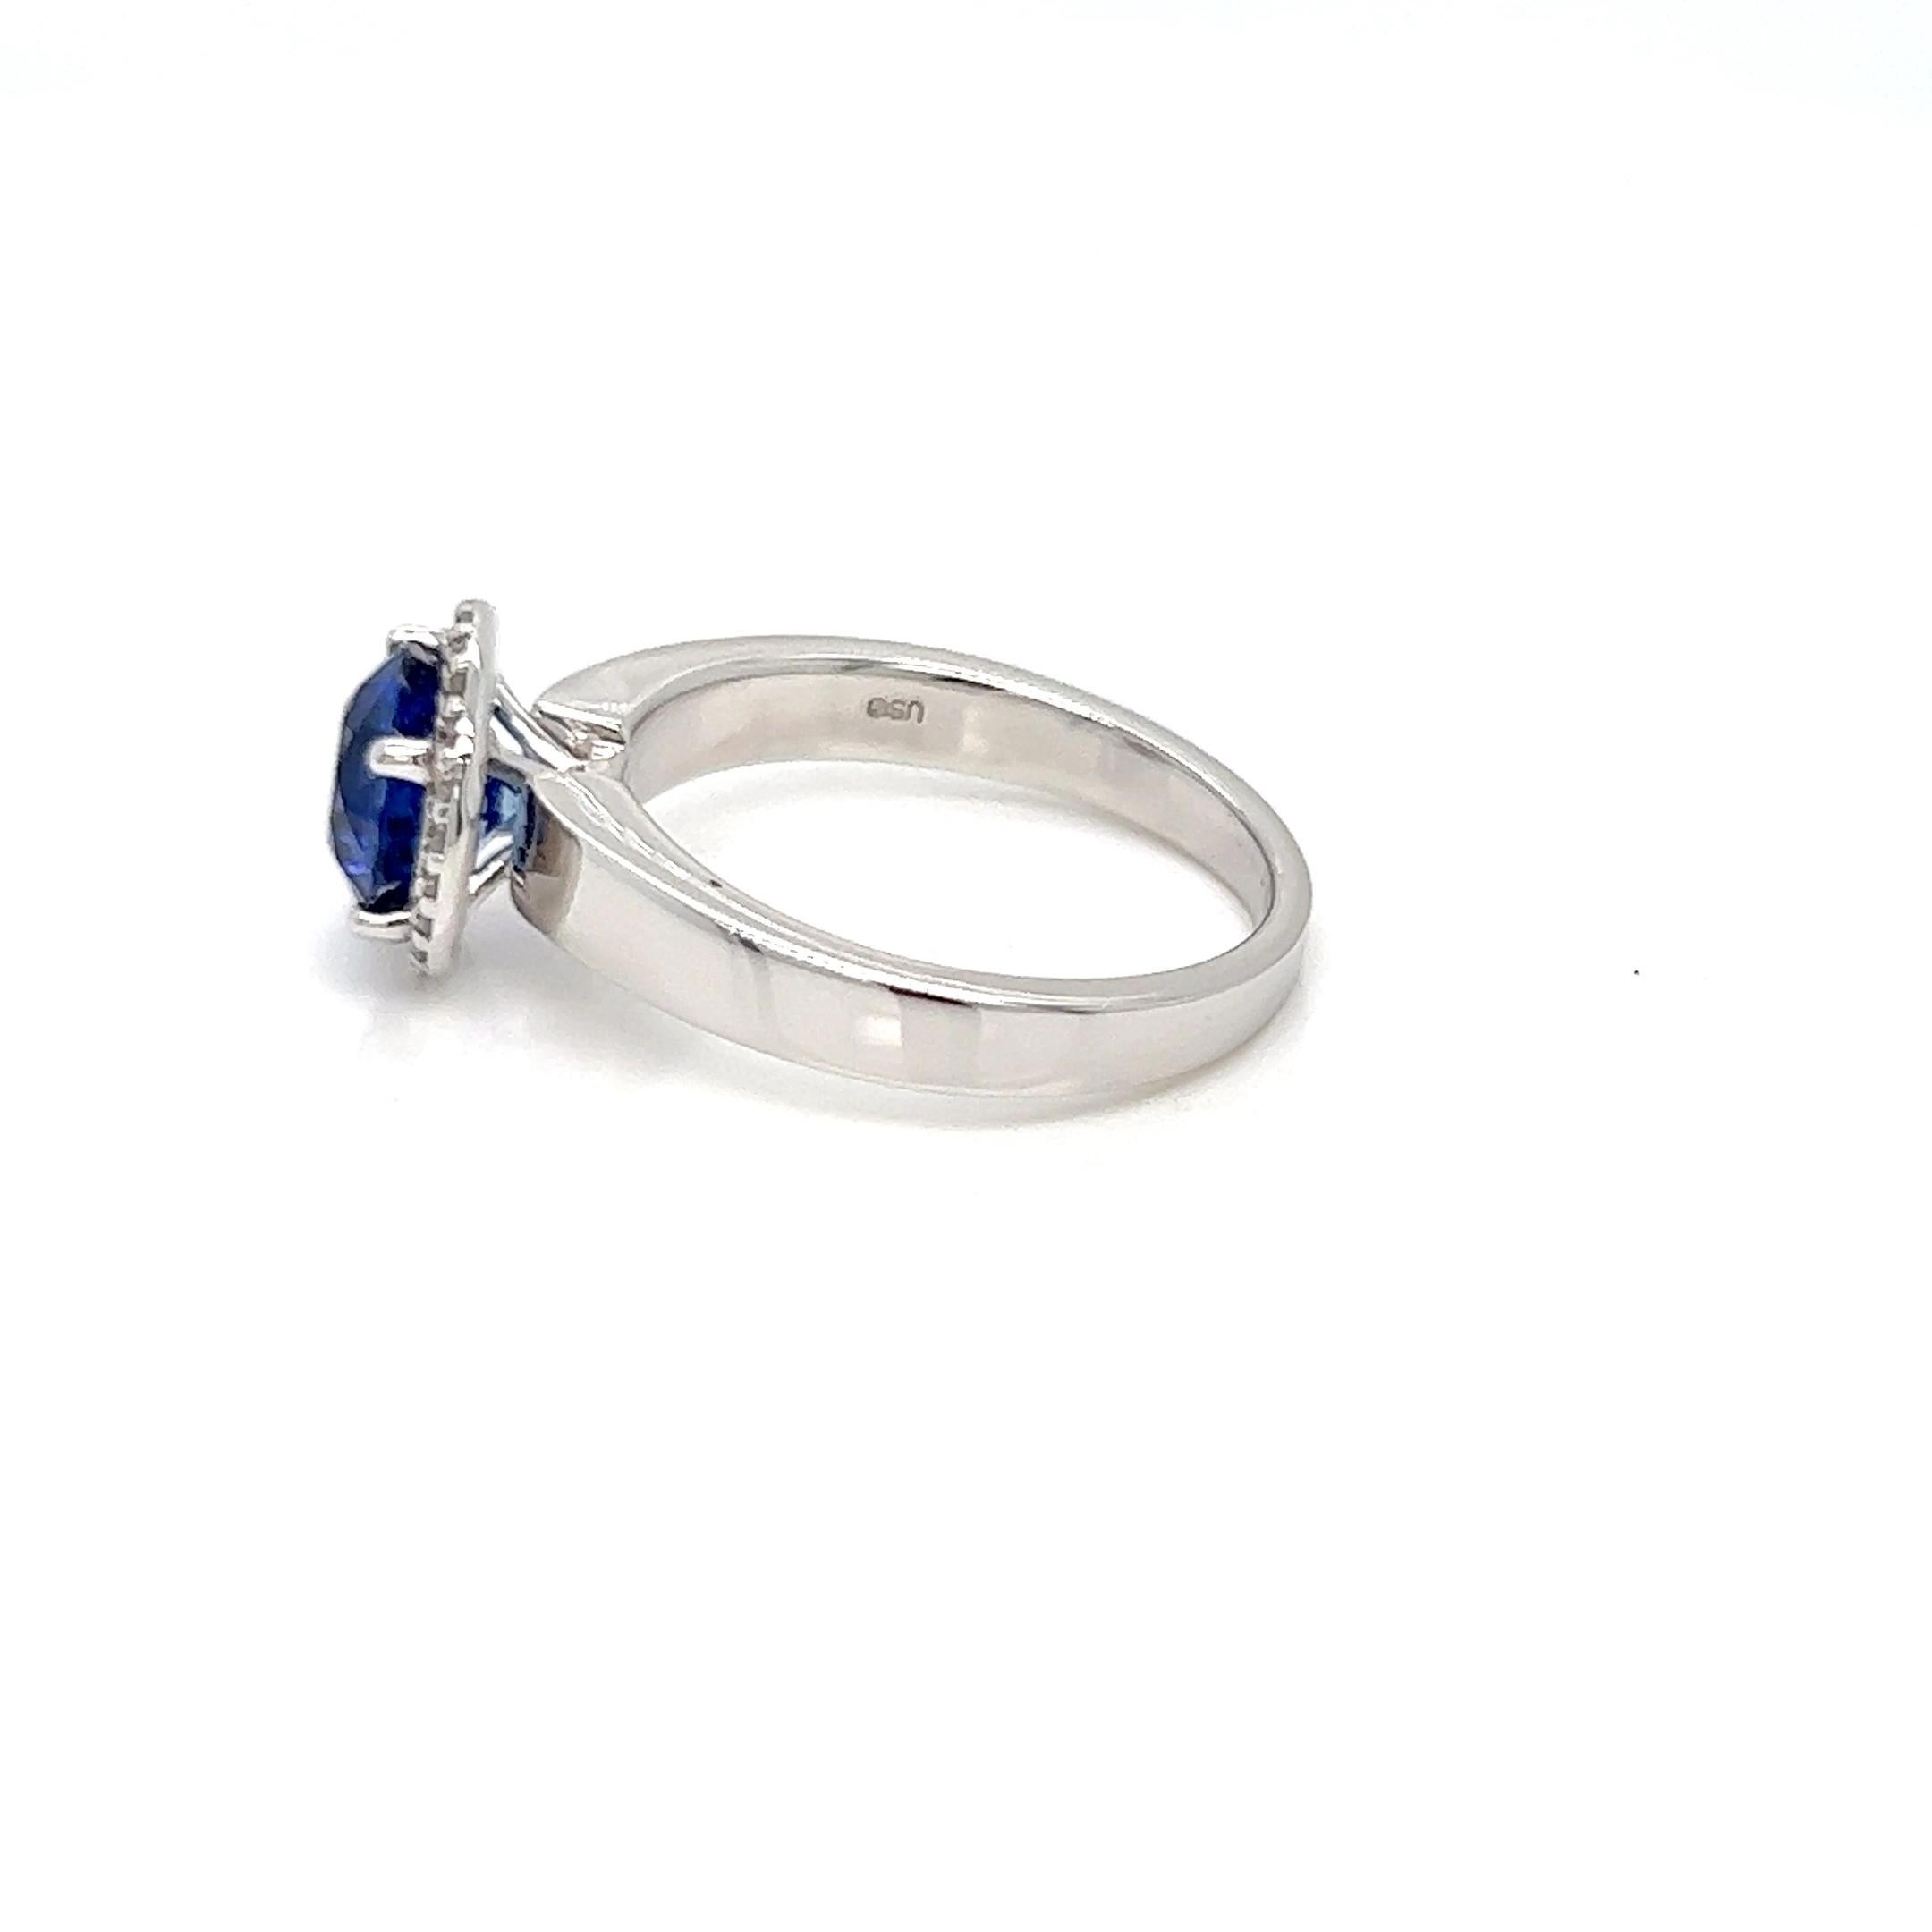 This spectacular Sapphire Solitaire Halo Ring with Diamonds consists of 1.91 carats Sri Lankan sapphire known for its vibrant blue hue surrounded with natural diamonds of 0.11 carats. Perfect harmony of color and texture is created by the addition